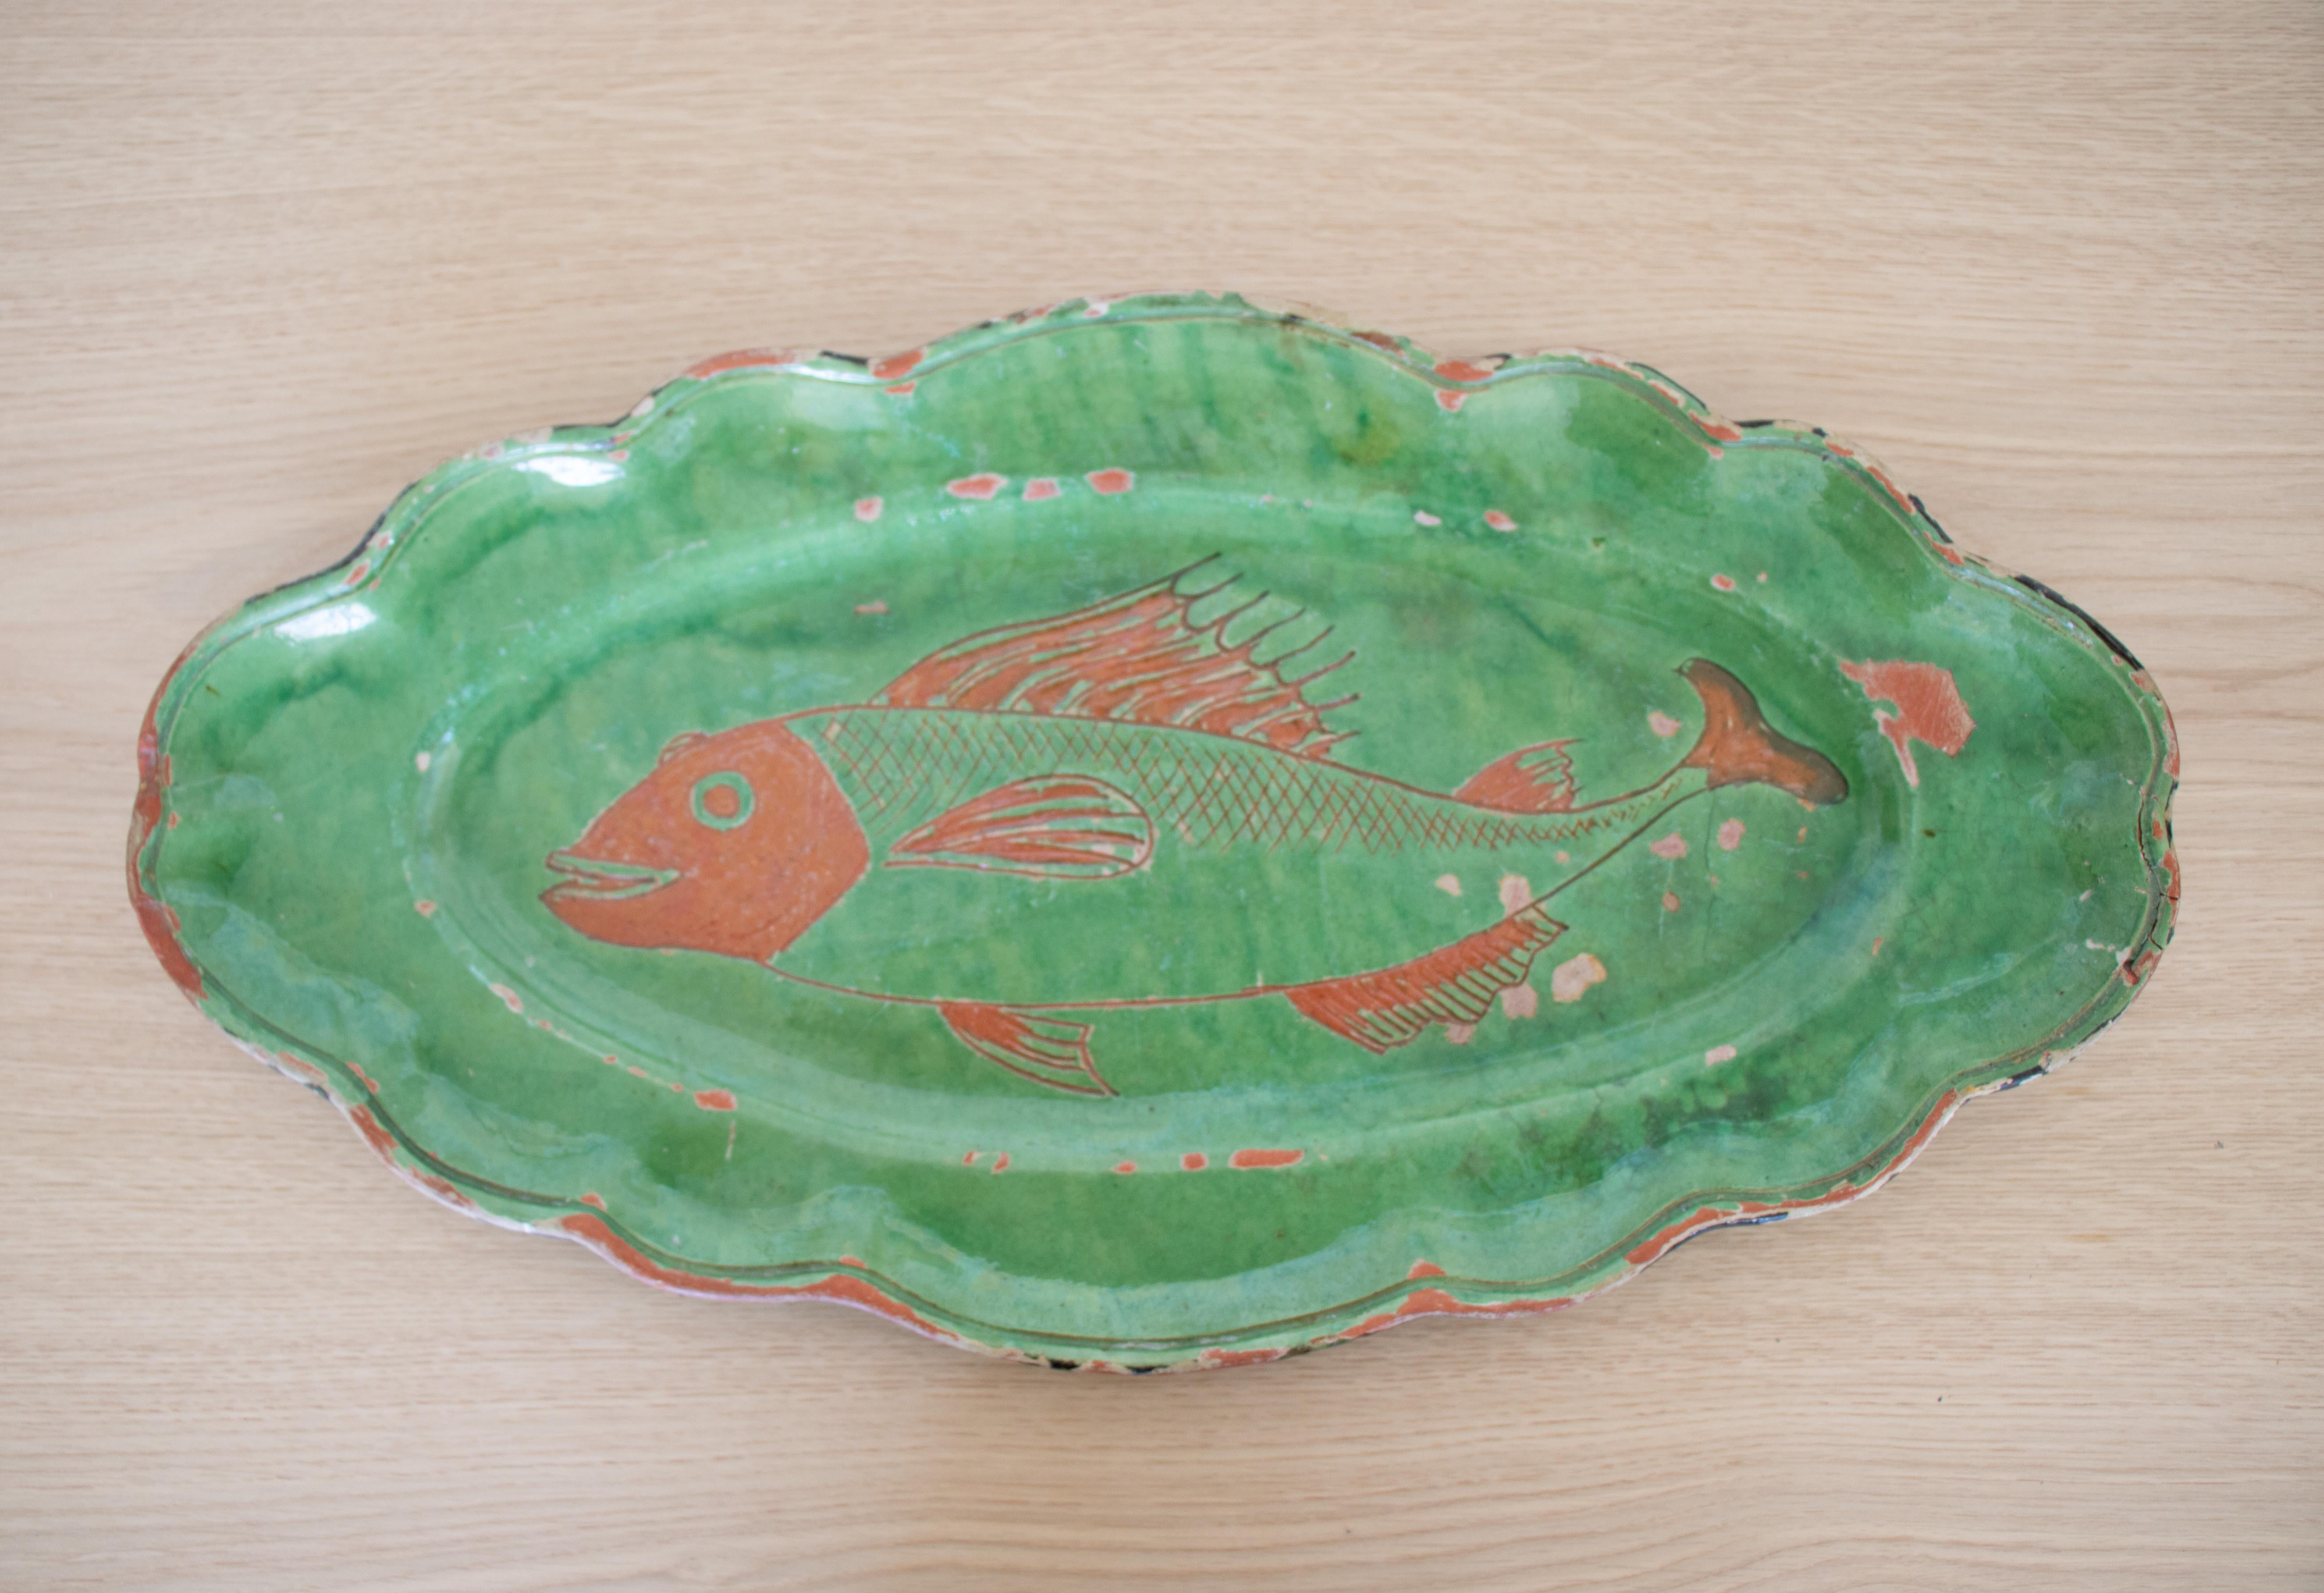 Large French terracotta oval platter with original chipped green paint and a fish motif in the center. Fun and unique center piece with scalloped edge.